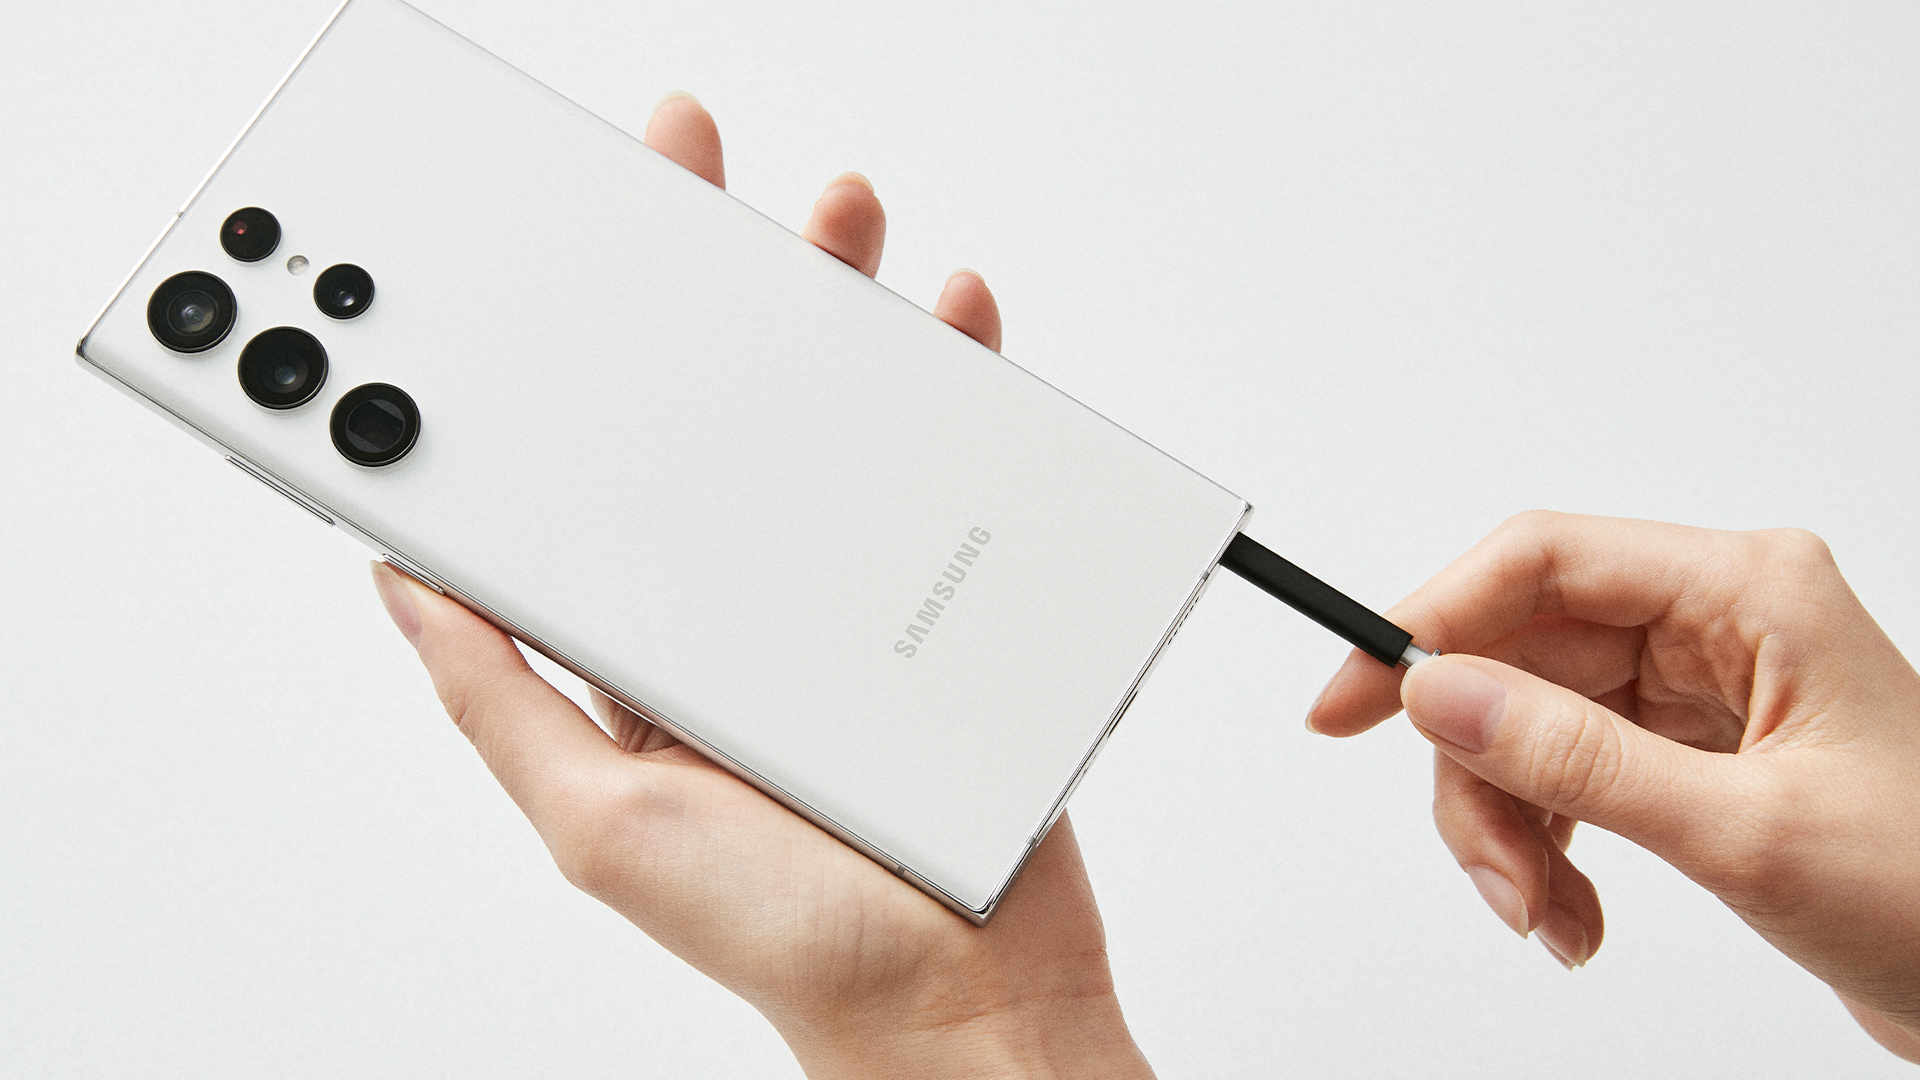 The Samsung Galaxy S22 Ultra in white with its S Pen.